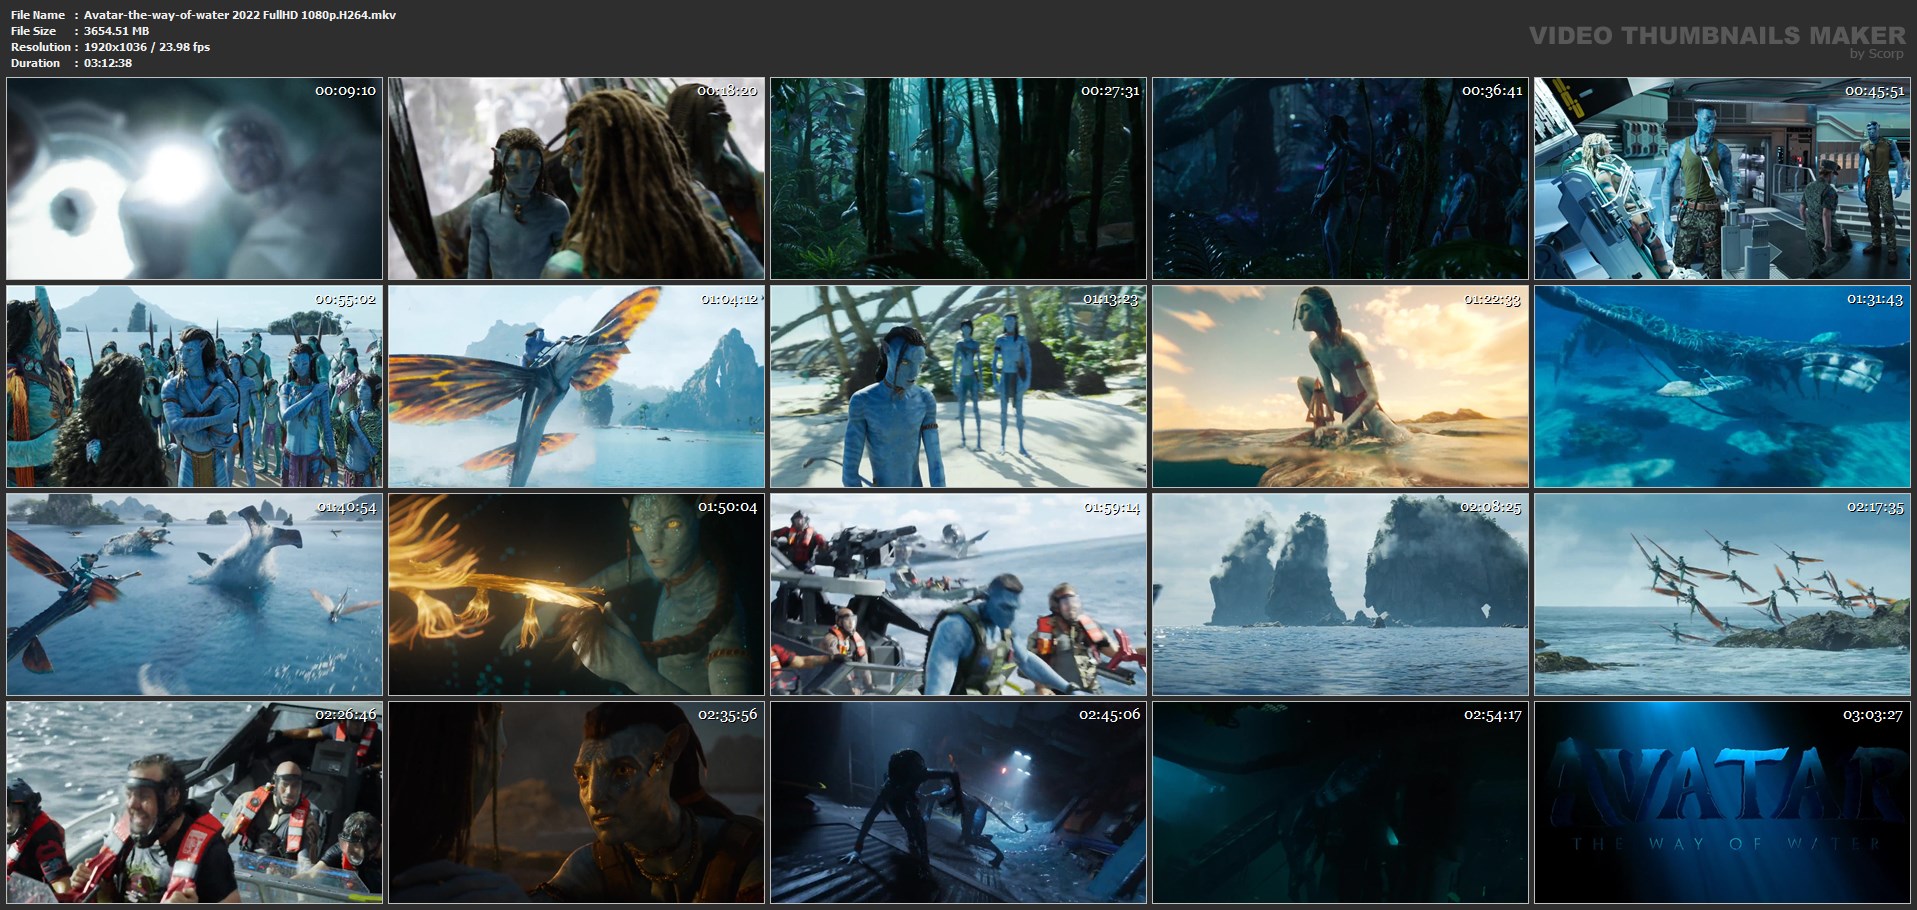 Avatar-the-way-of-water 2022 FullHD 1080p.H264